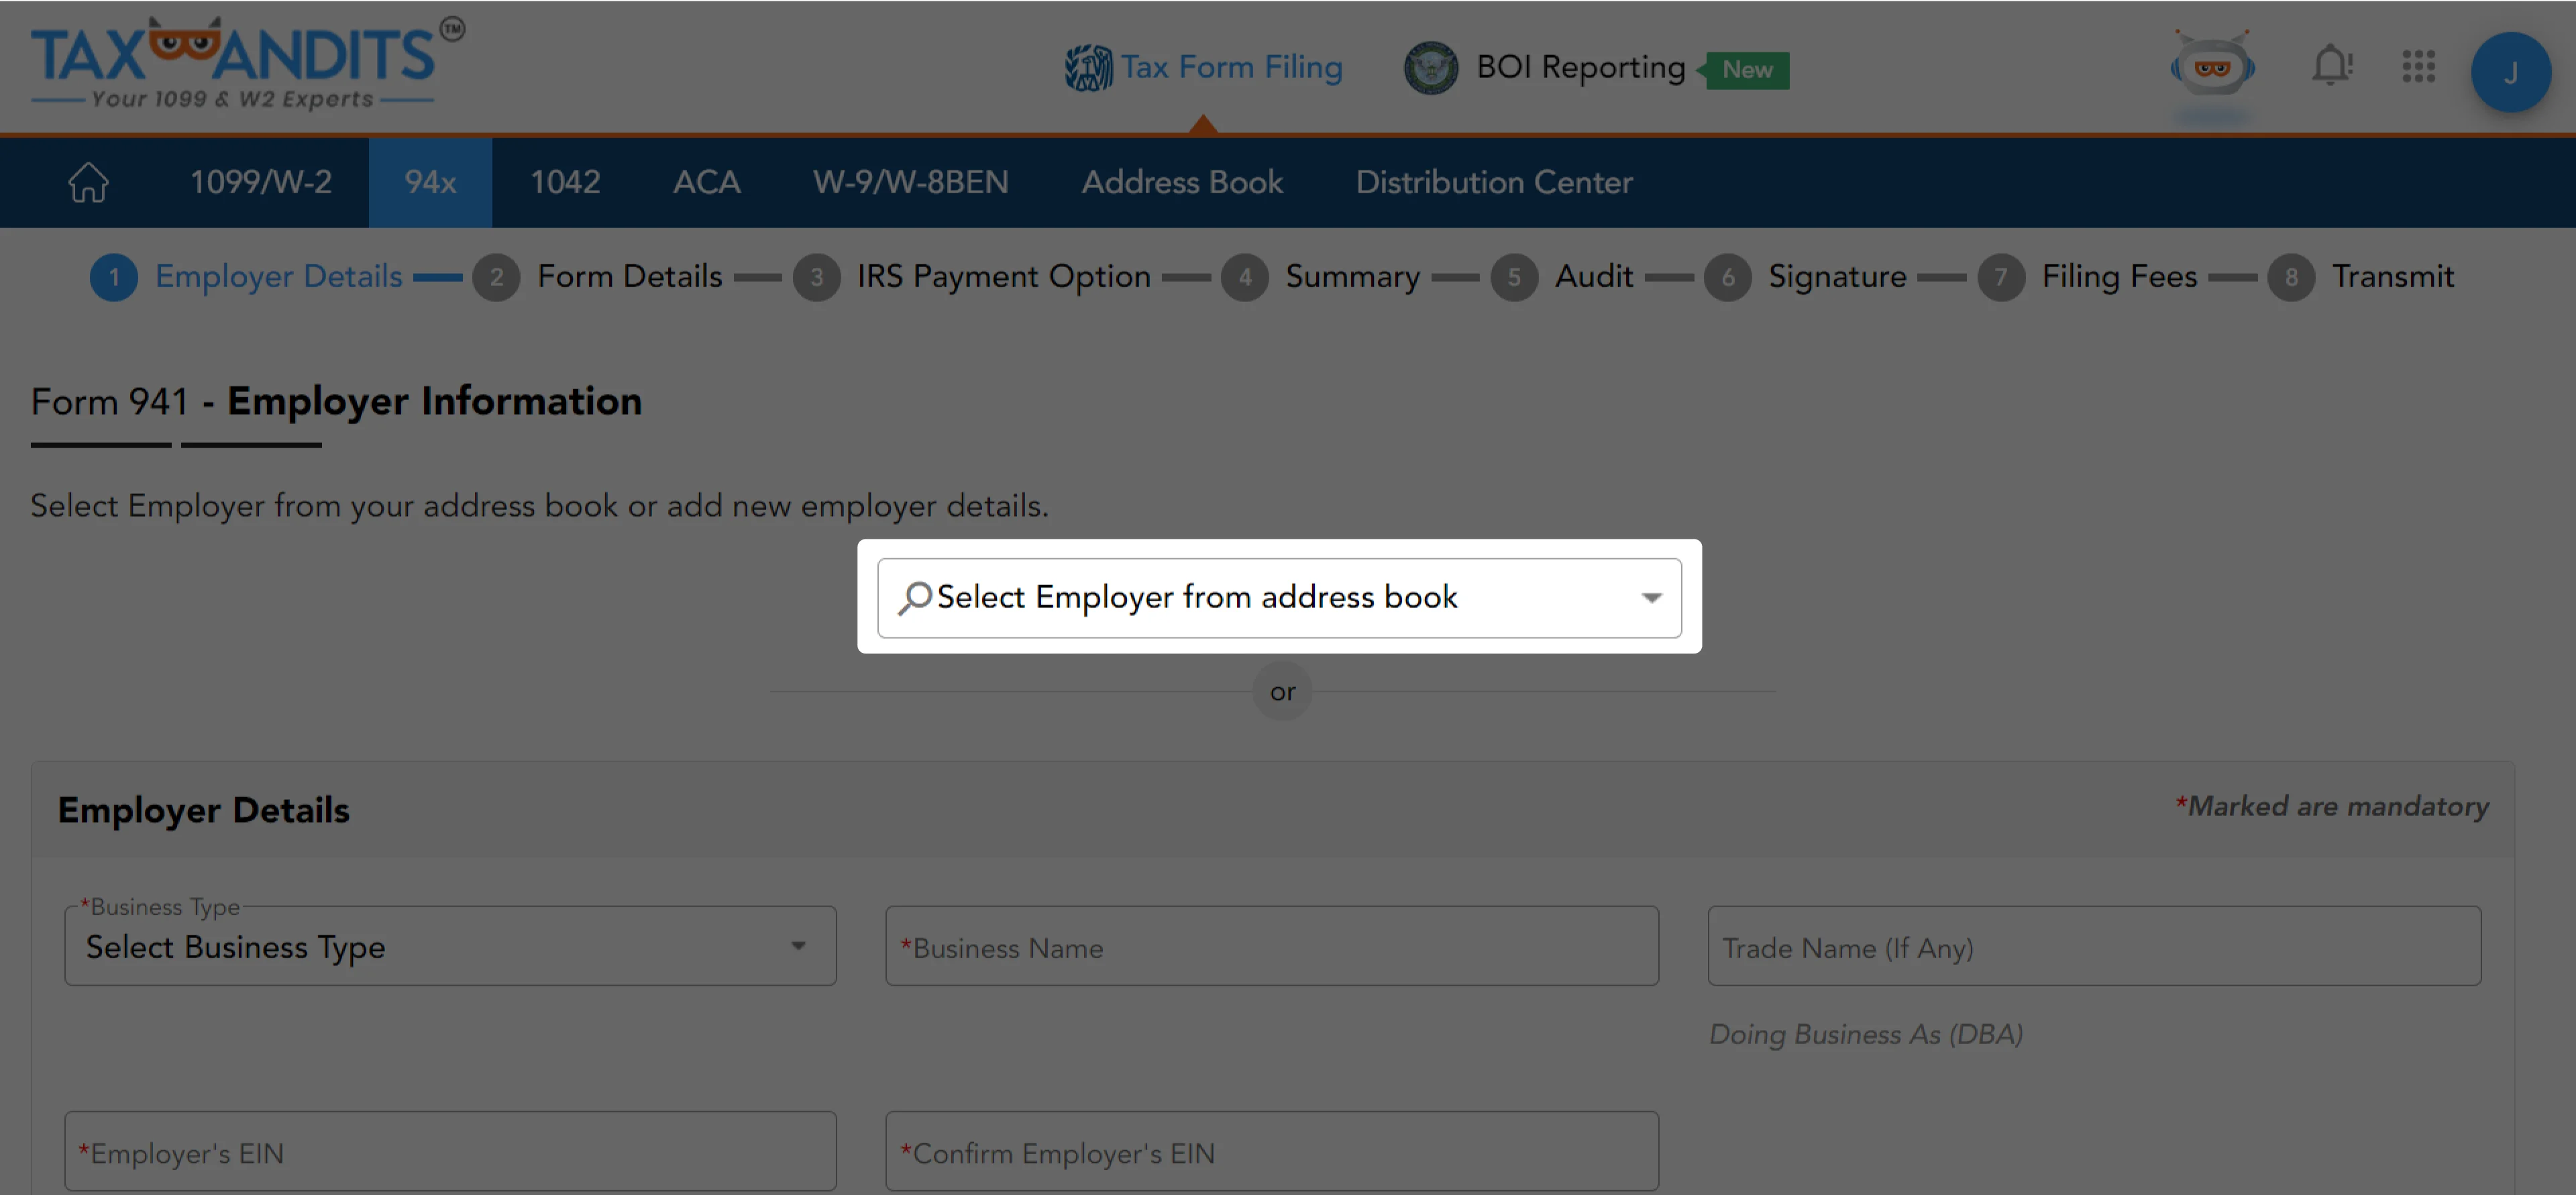 Select Employer from Address book